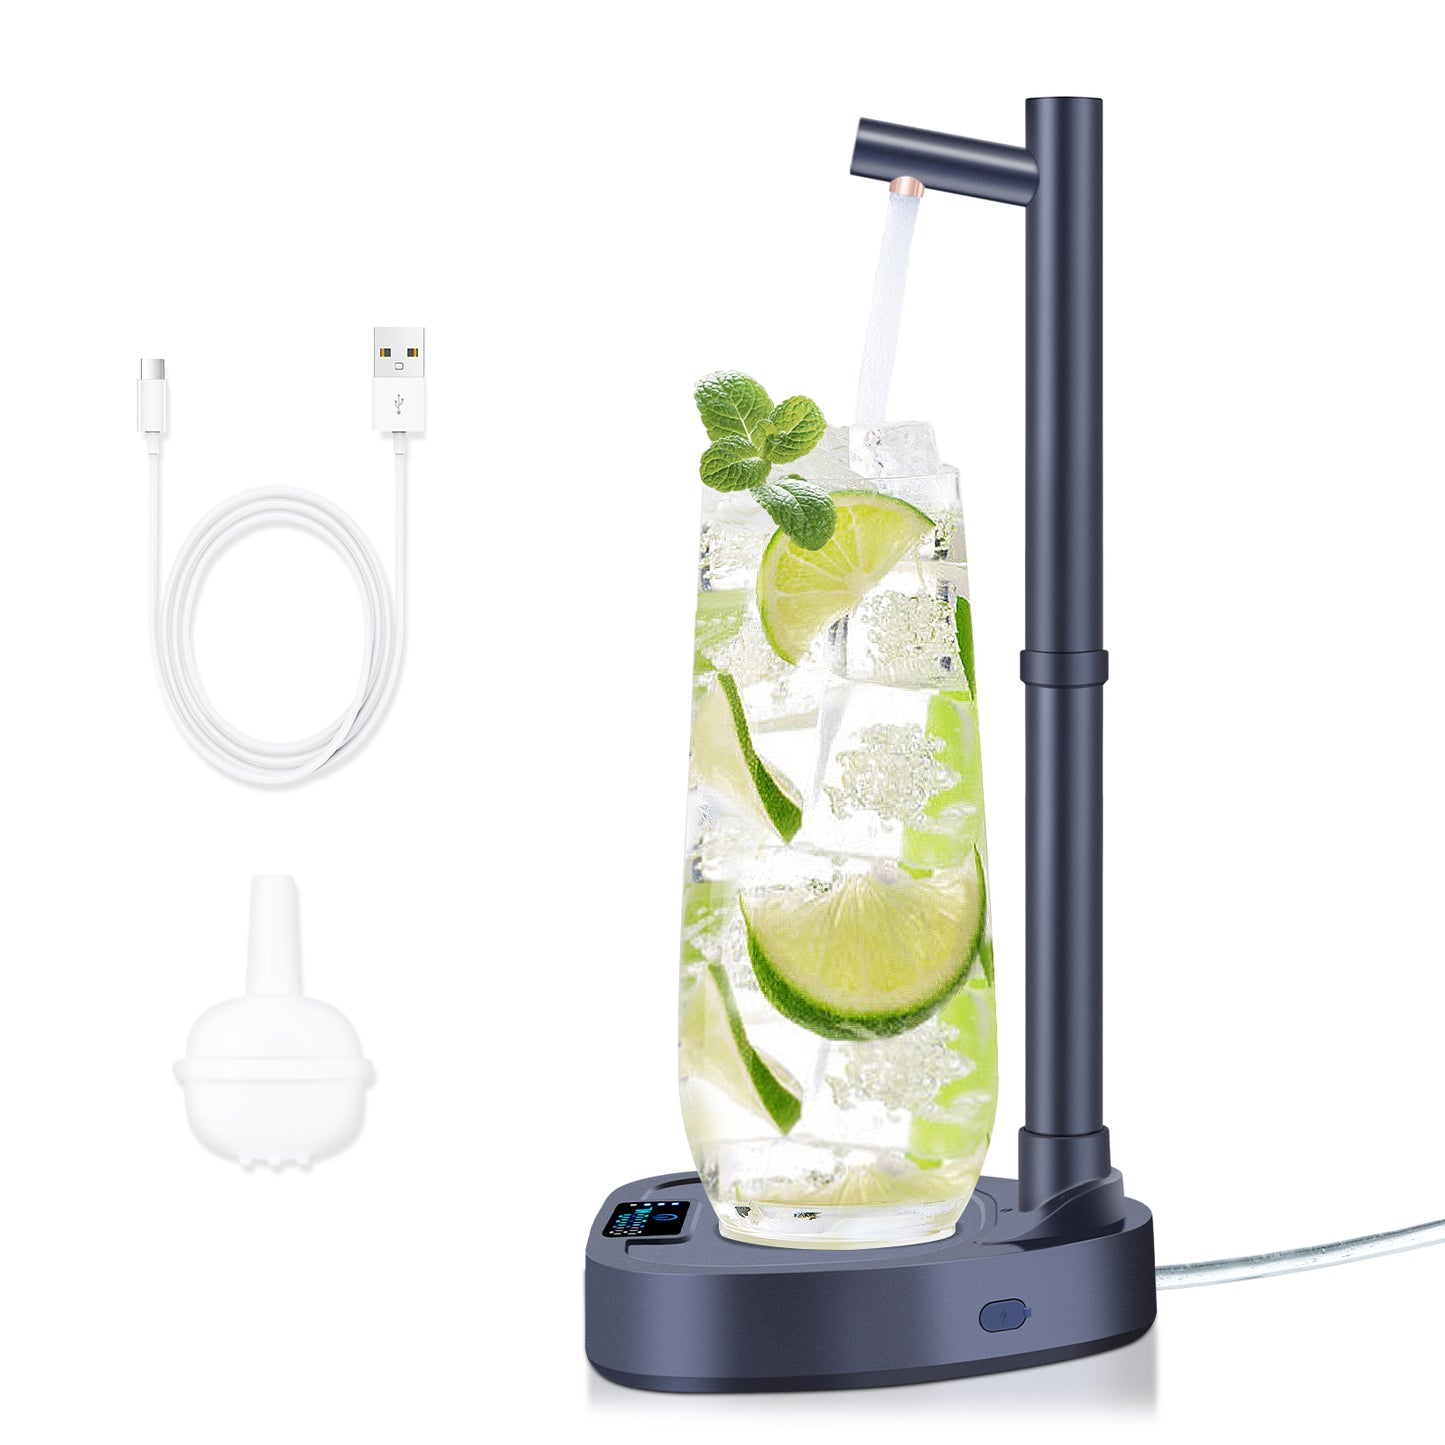 Smart Automatic Desktop Water Dispenser: Rechargeable, Portable, with Extended Tube and Stand for Easy Bottle Refills